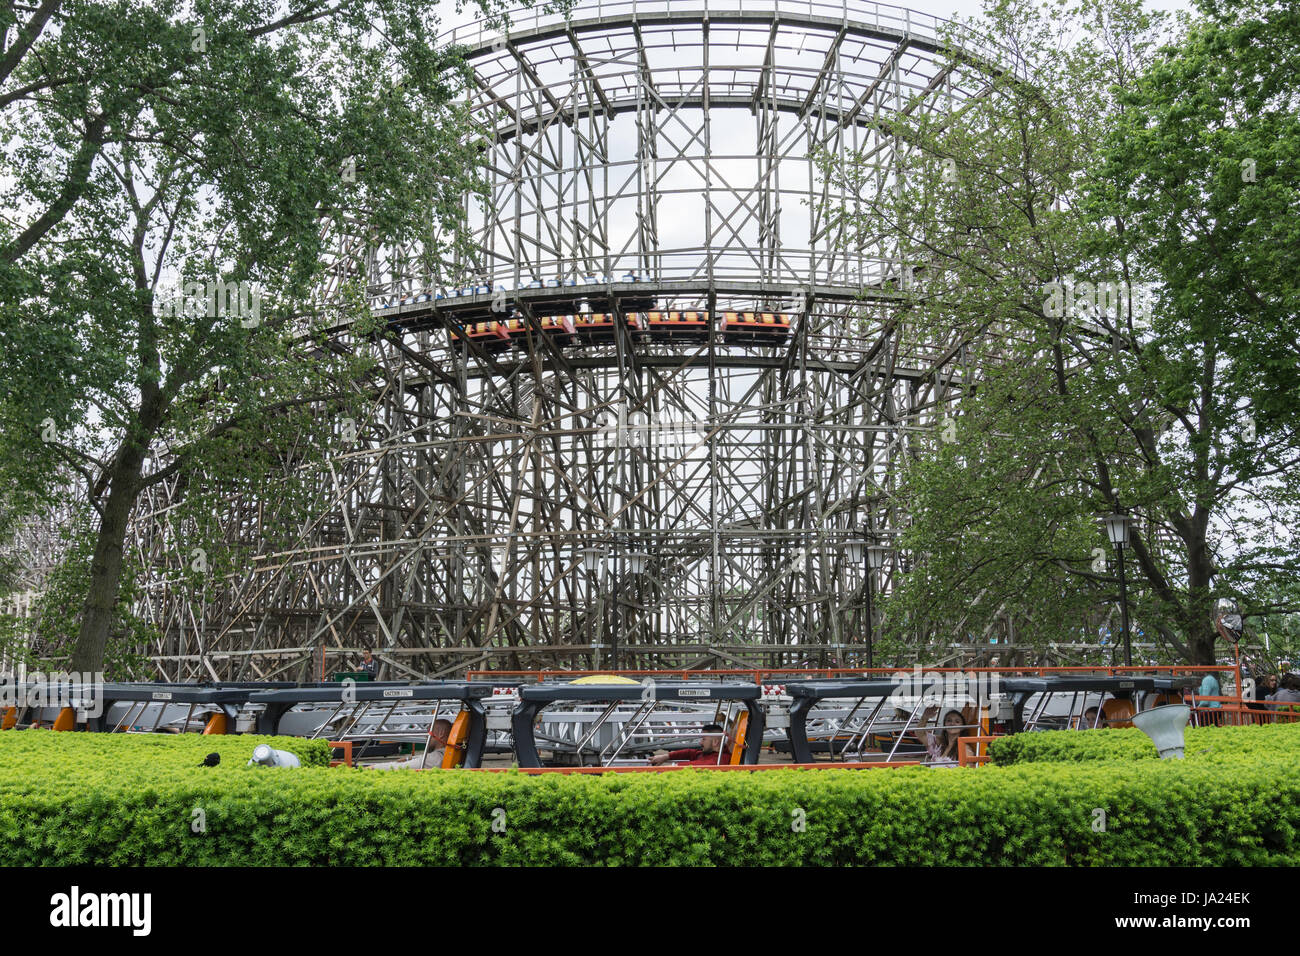 Wooden Coaster in Distance Stock Photo